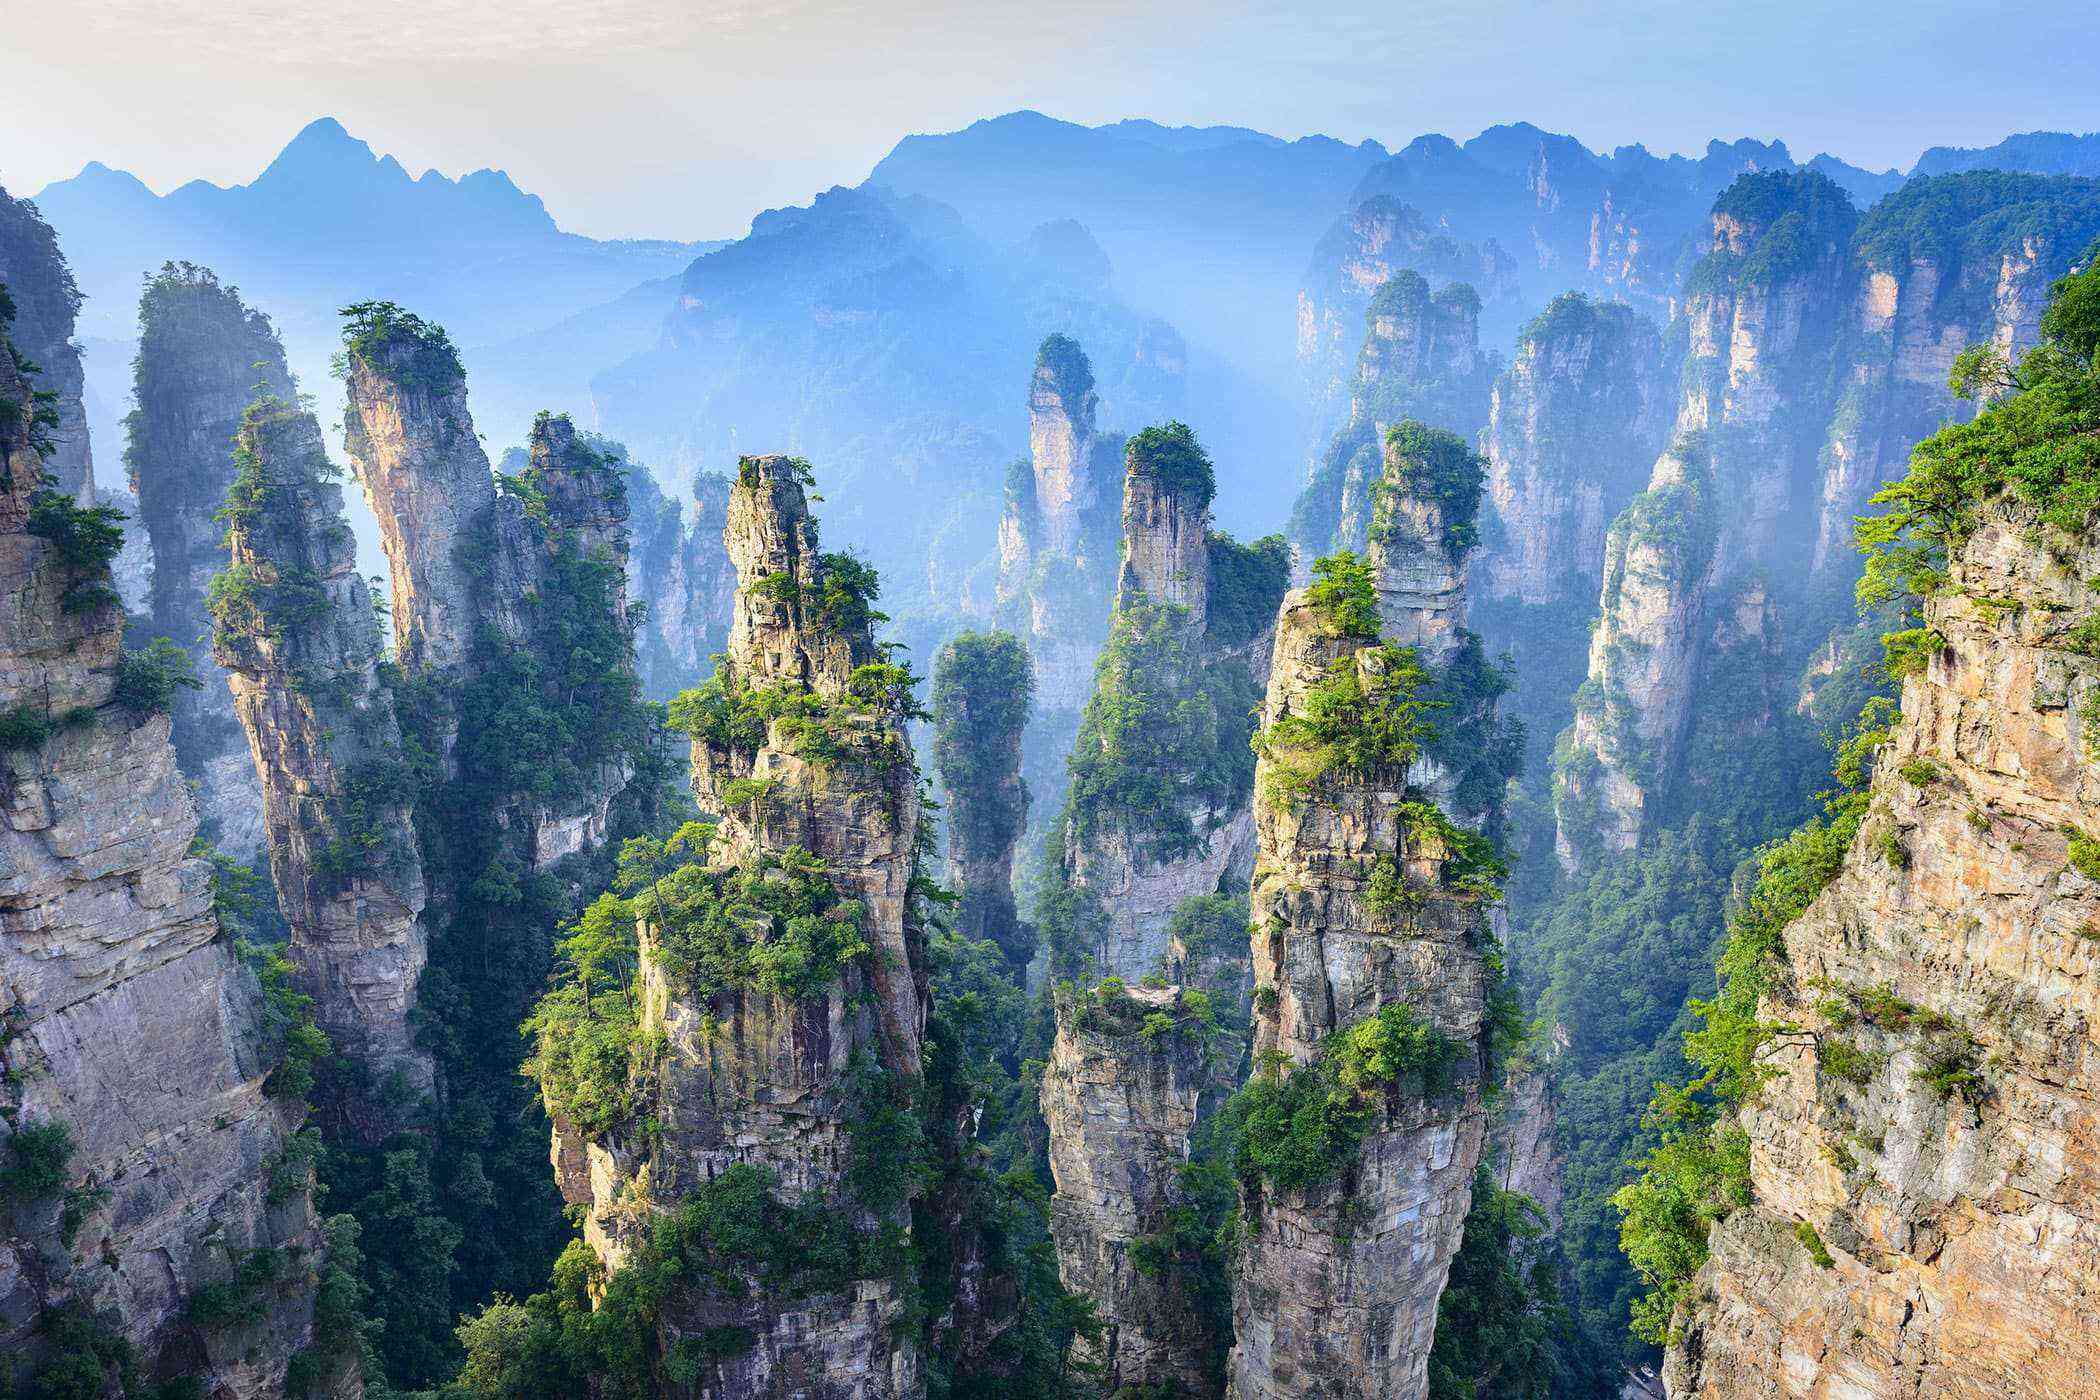 Create a Travel Bucket List ✈️ to Determine What Fantasy World You Are Most Suited for Tianzi Mountains, Zhangjiajie National Forest Park, China